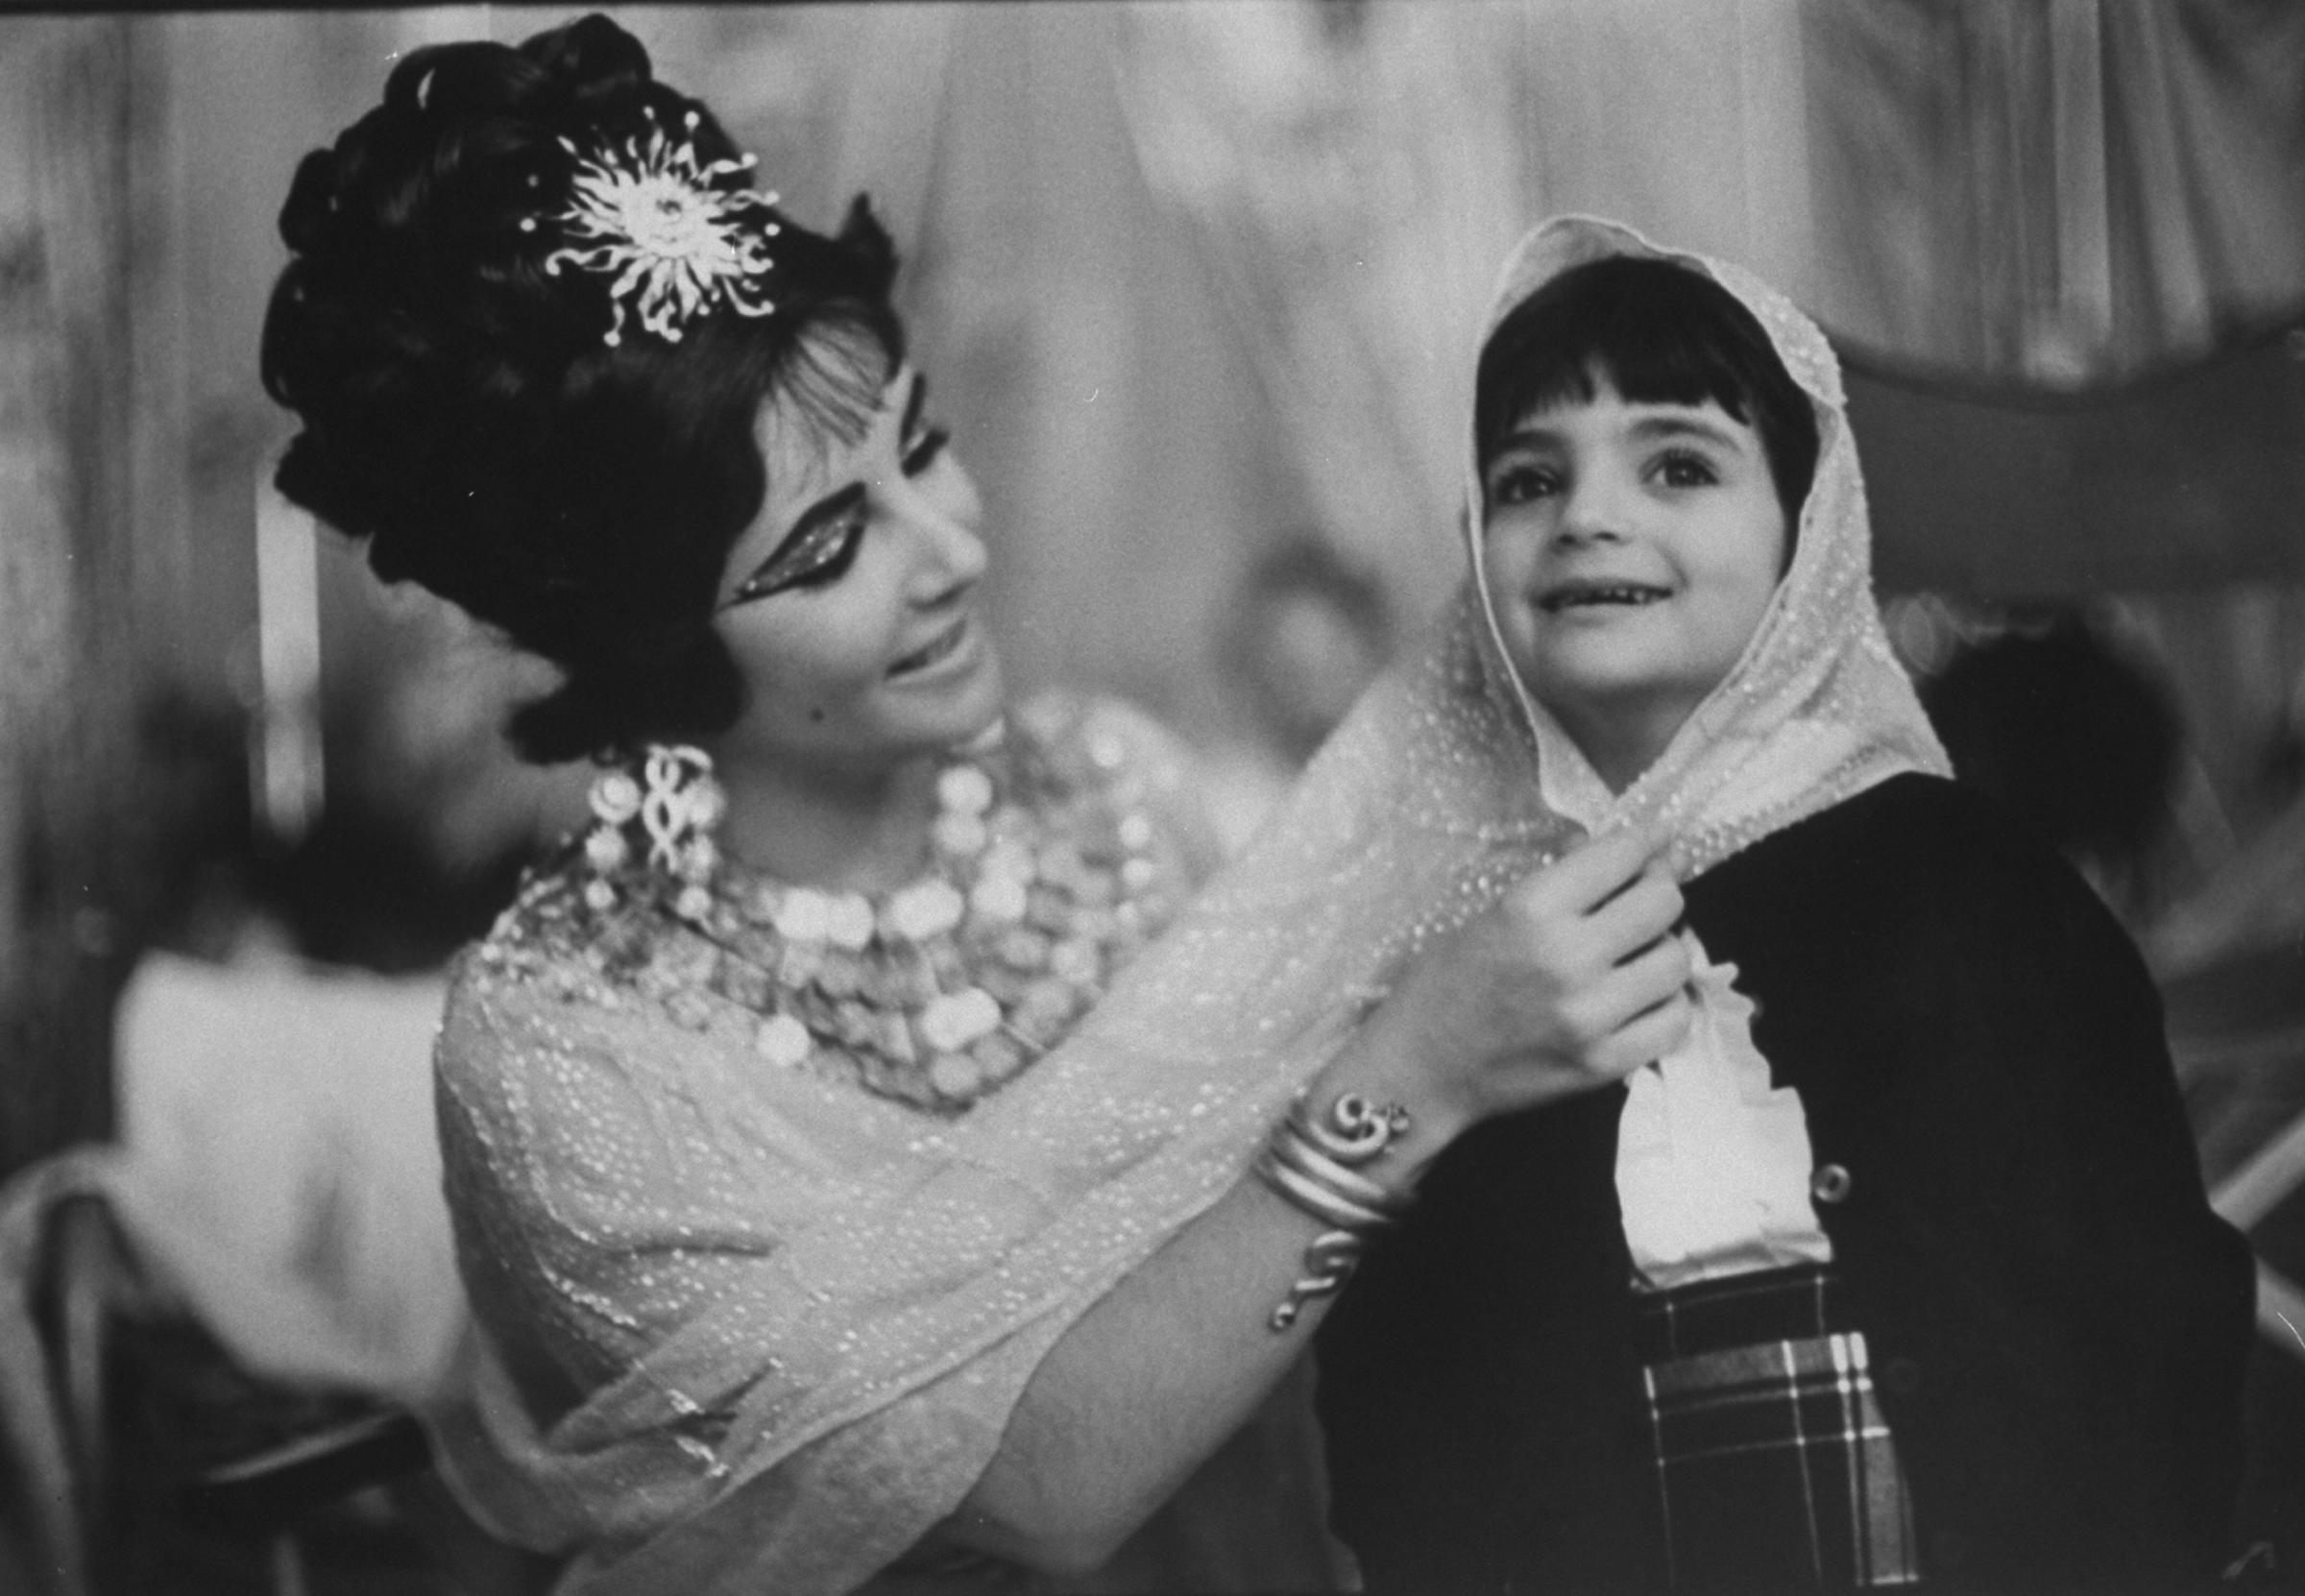 Elizabeth Taylor in costume on the Rome set of Cleopatra plays with daughter Liza in 1962